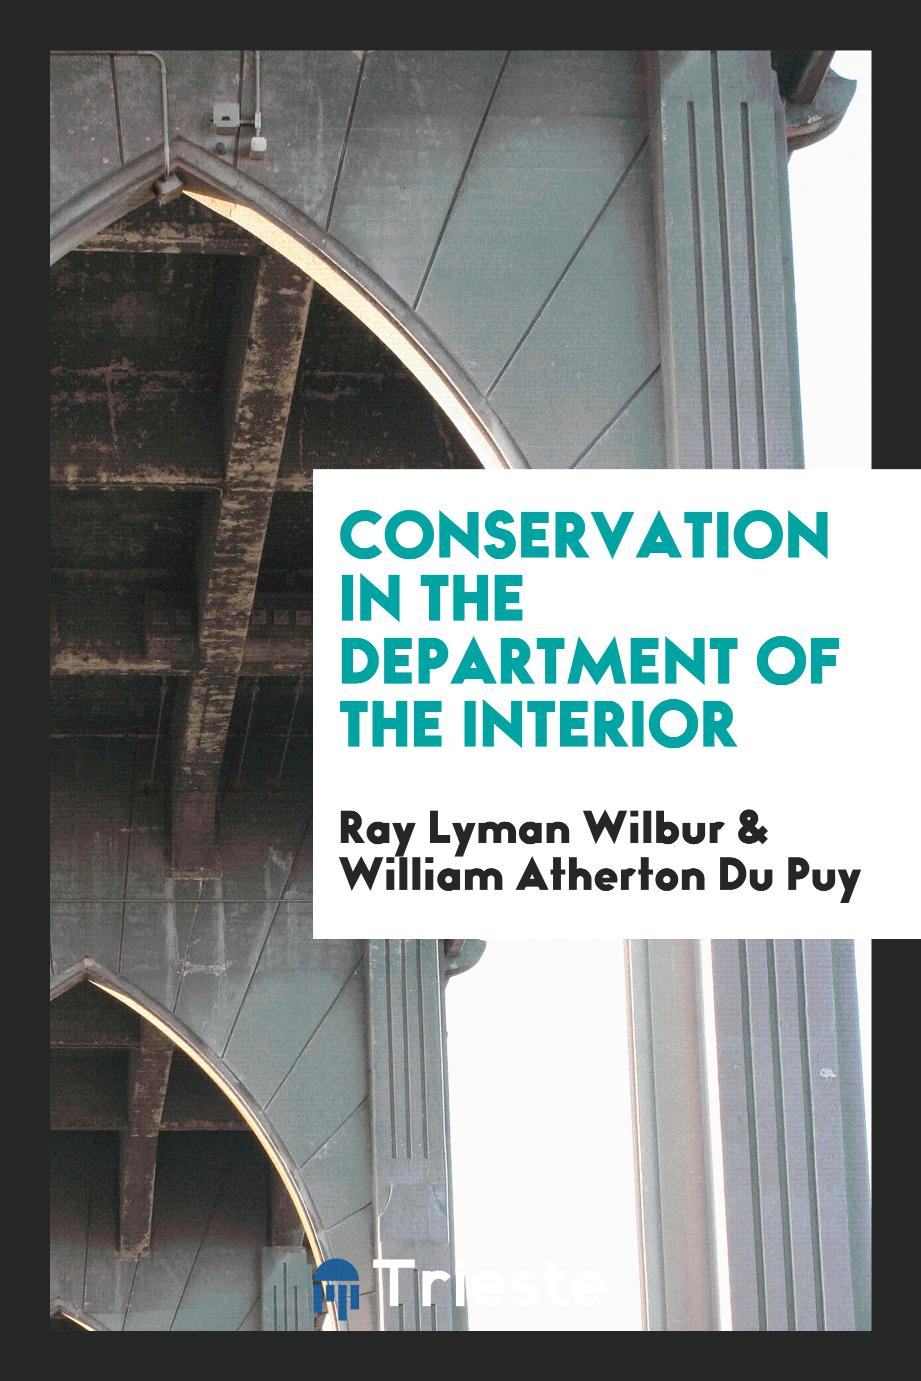 Conservation in the Department of the interior